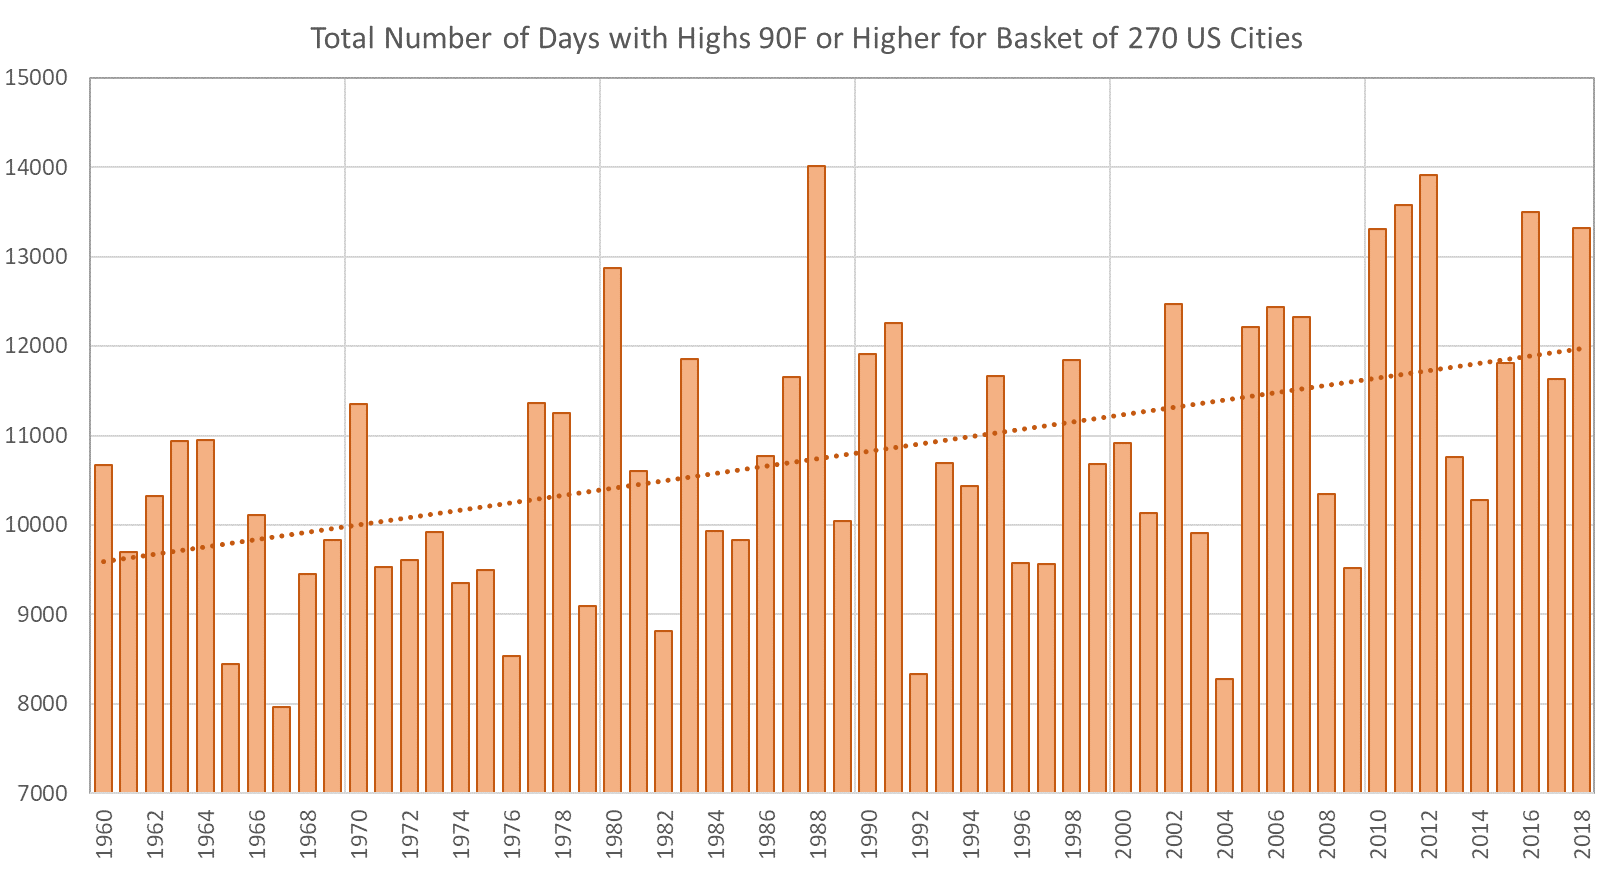 Total Number of Days with Highs 90F or Higher